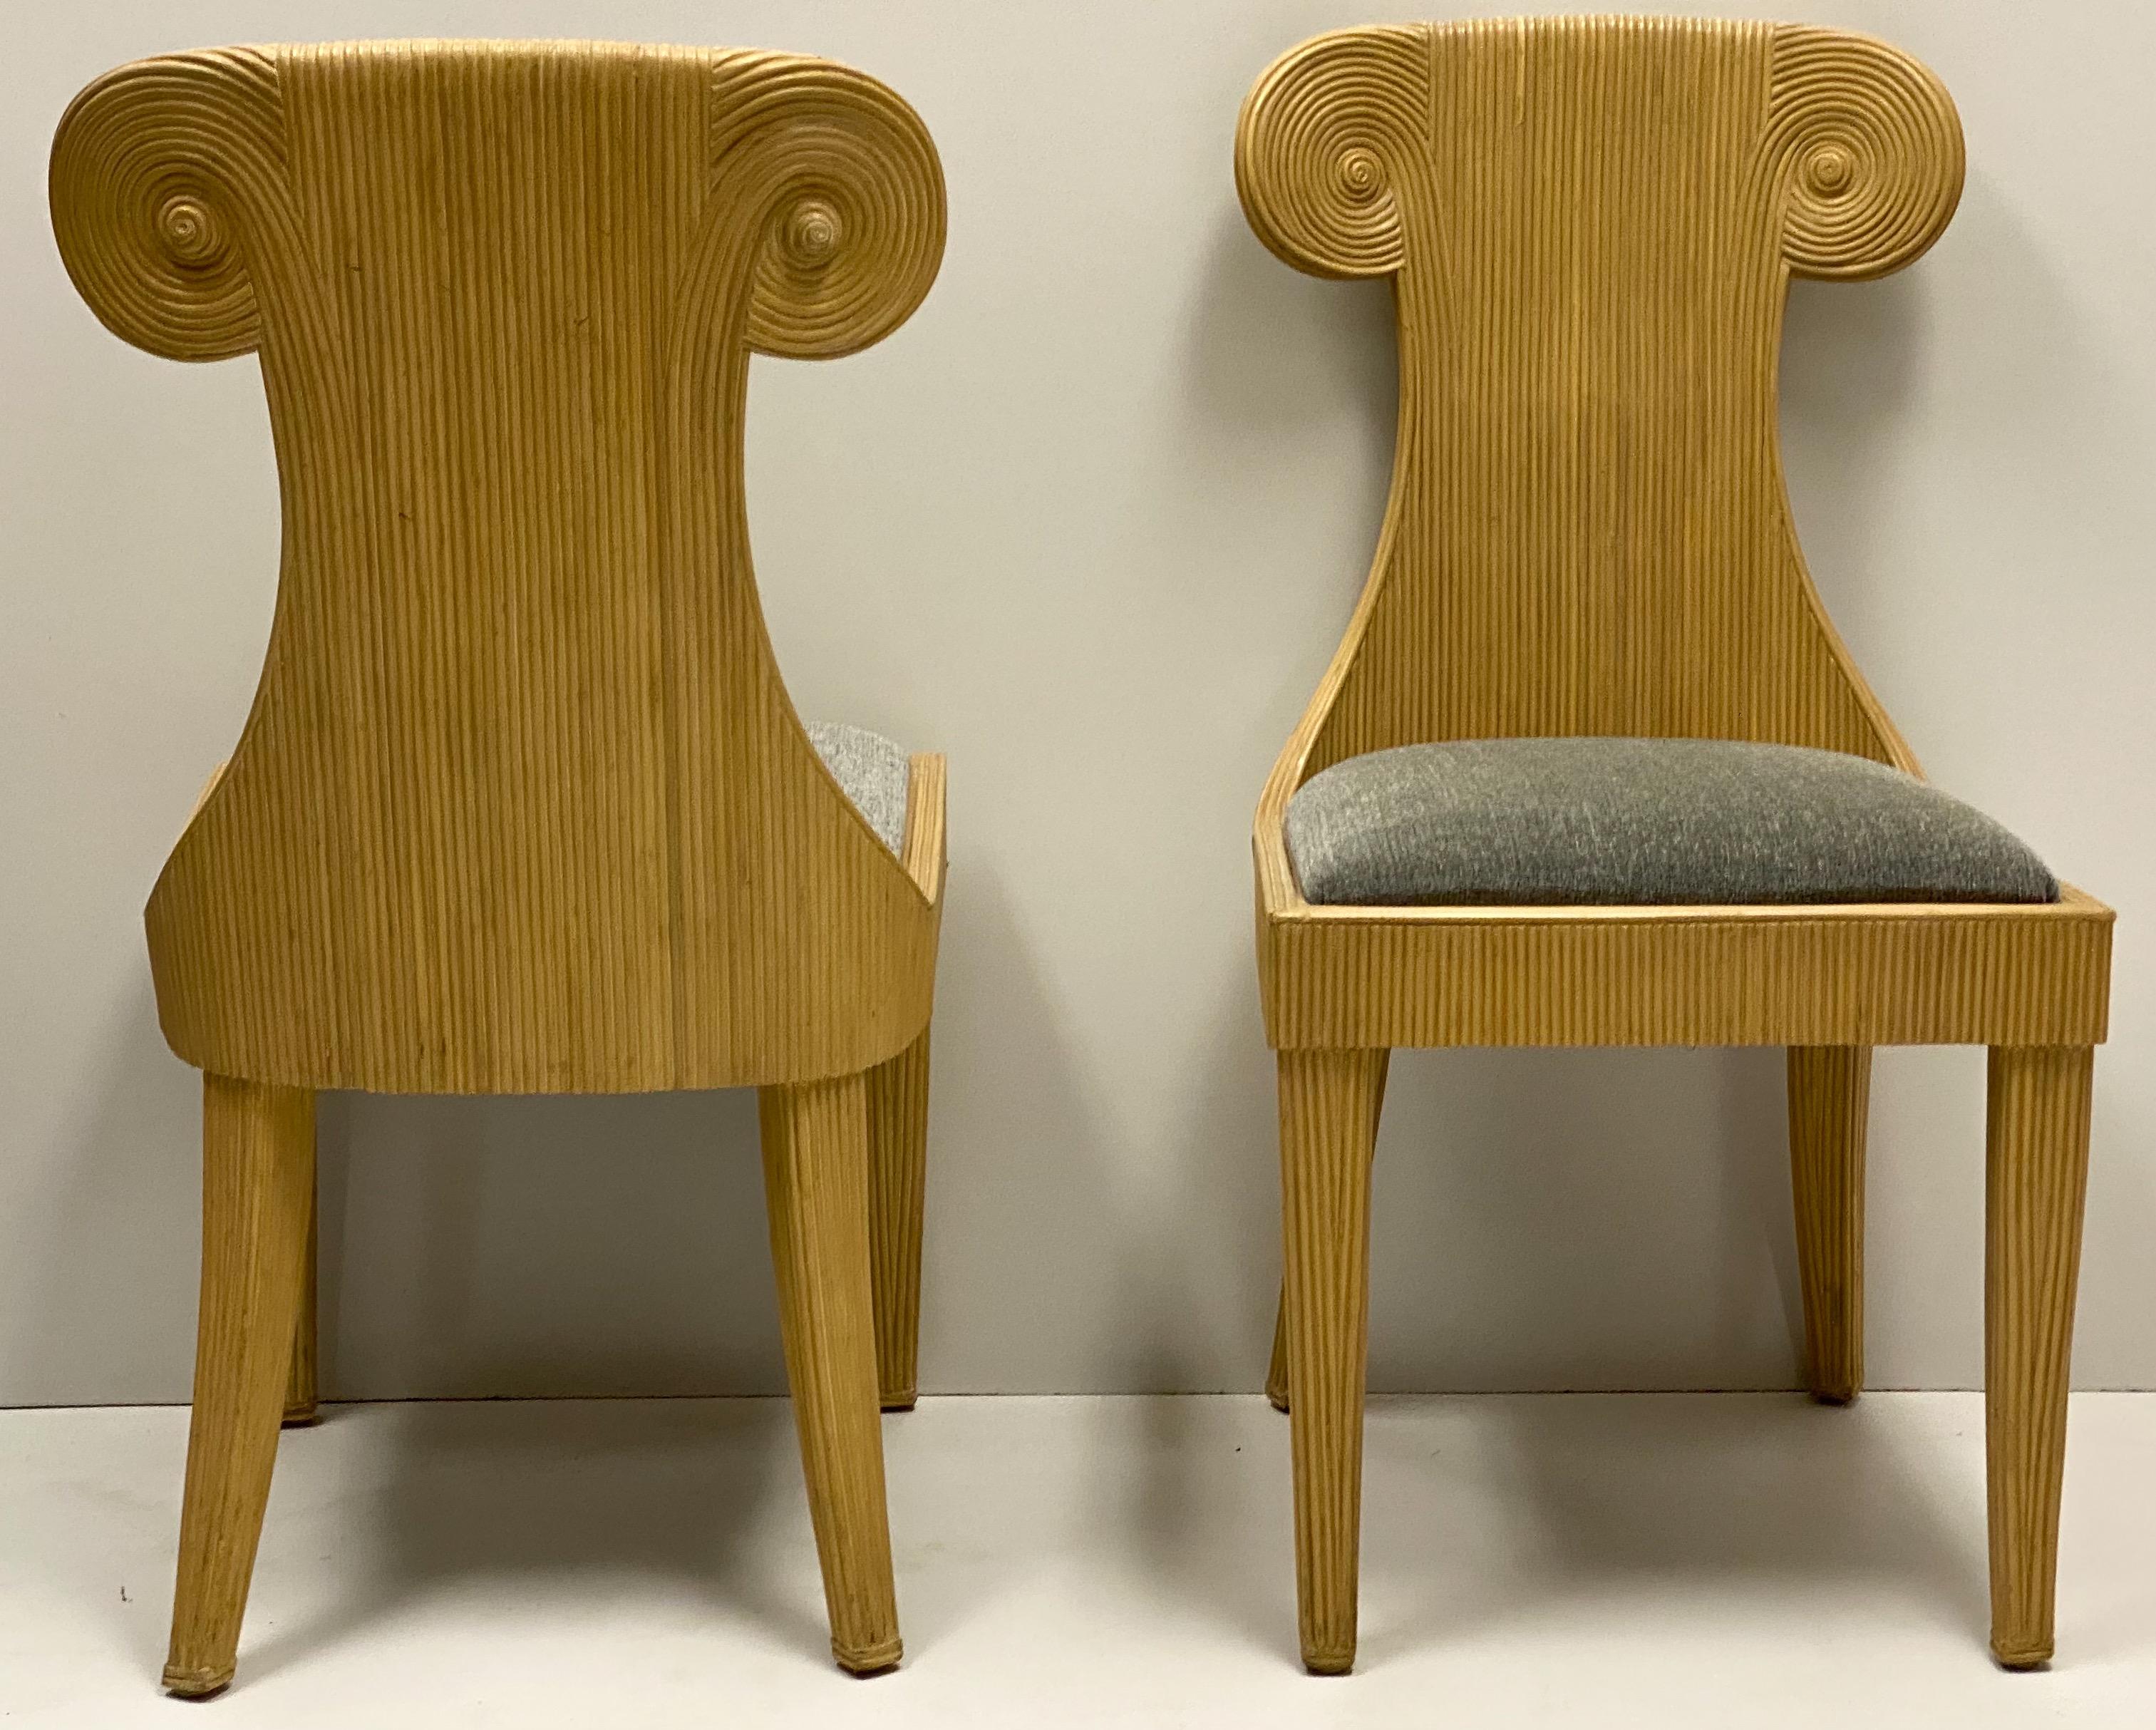 This is a set of four pencil bamboo chairs with an interesting Klismos form. They are in very good condition, including the vintage gray upholstery. They are unmarked.